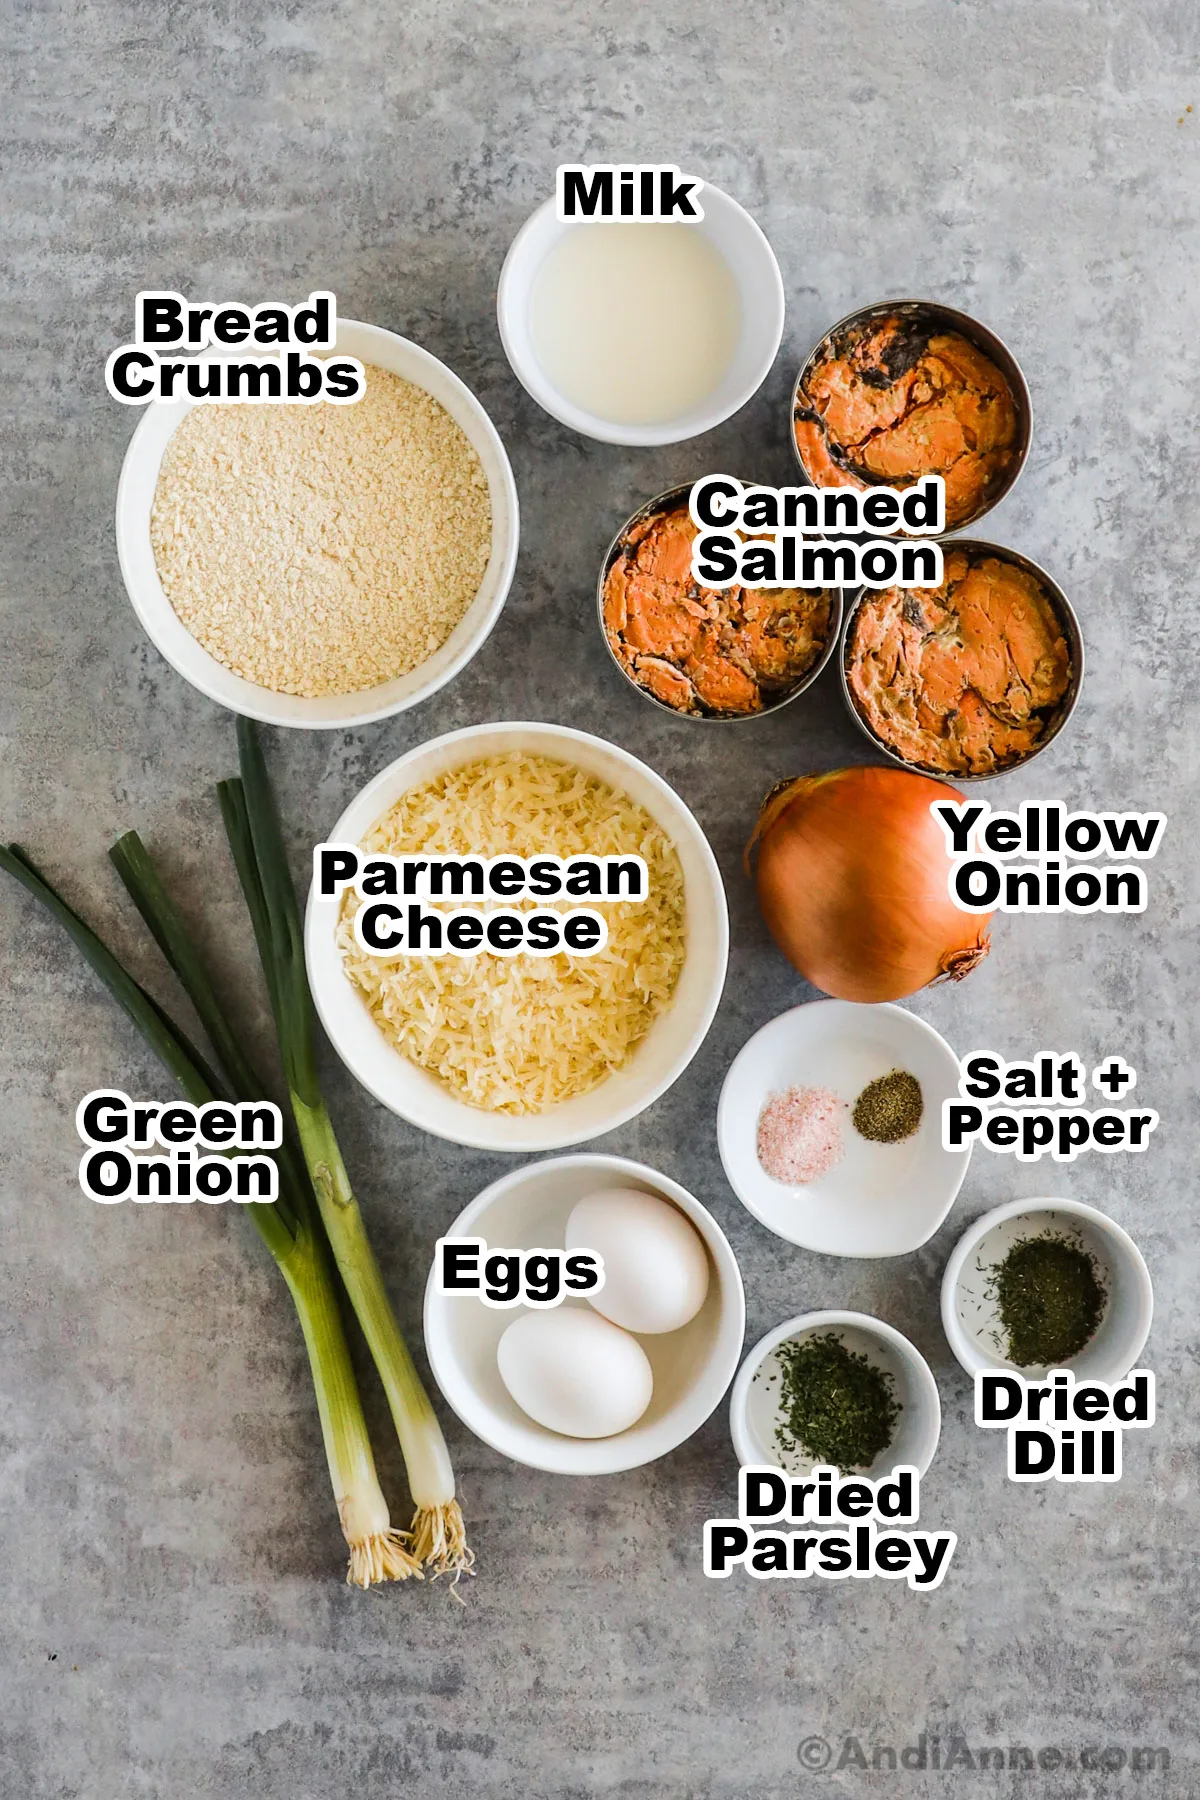 Recipe ingredients on the counter including bowls of bread crumbs, parmesan cheese, milk, canned salmon, yellow onion, green onion, eggs, dried dill and parsley.